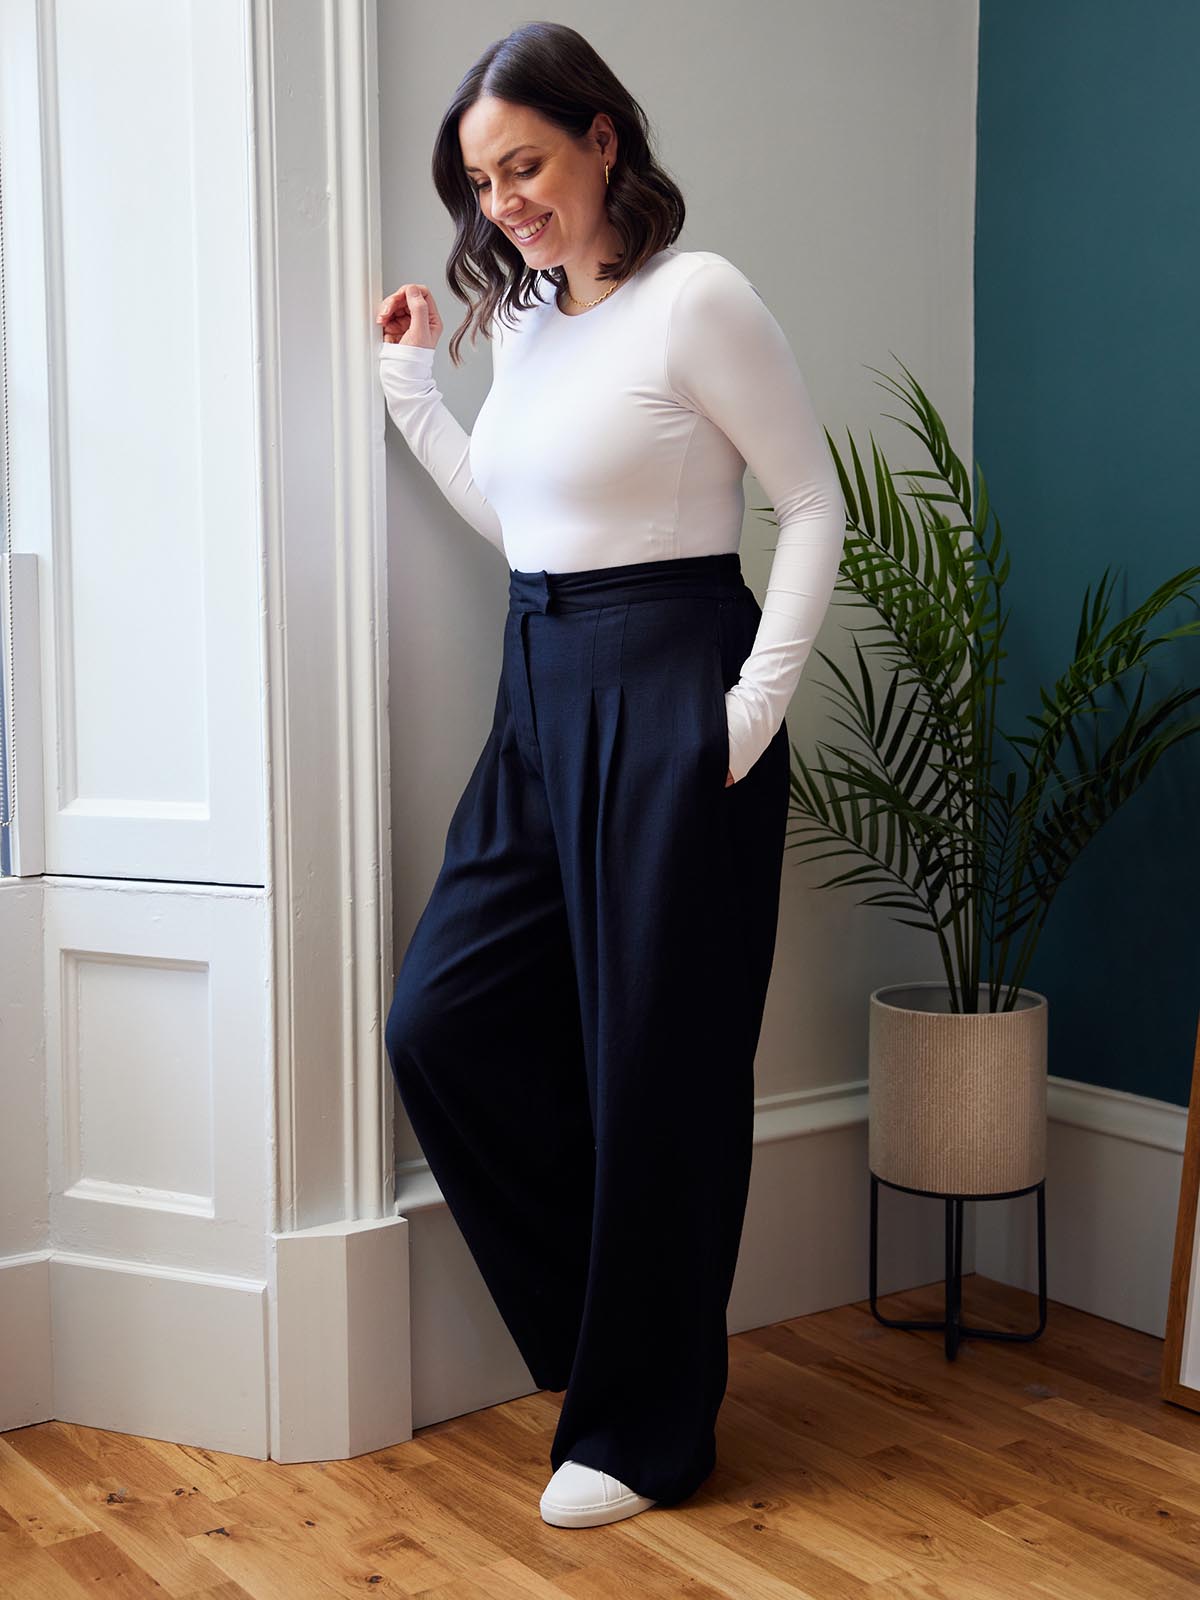 Model wearing the Lana sustainable trousers in black and a long sleeve white t-shirt, pictured leaning against a wall and smiling at the ground in a living room in front of a potted plant.